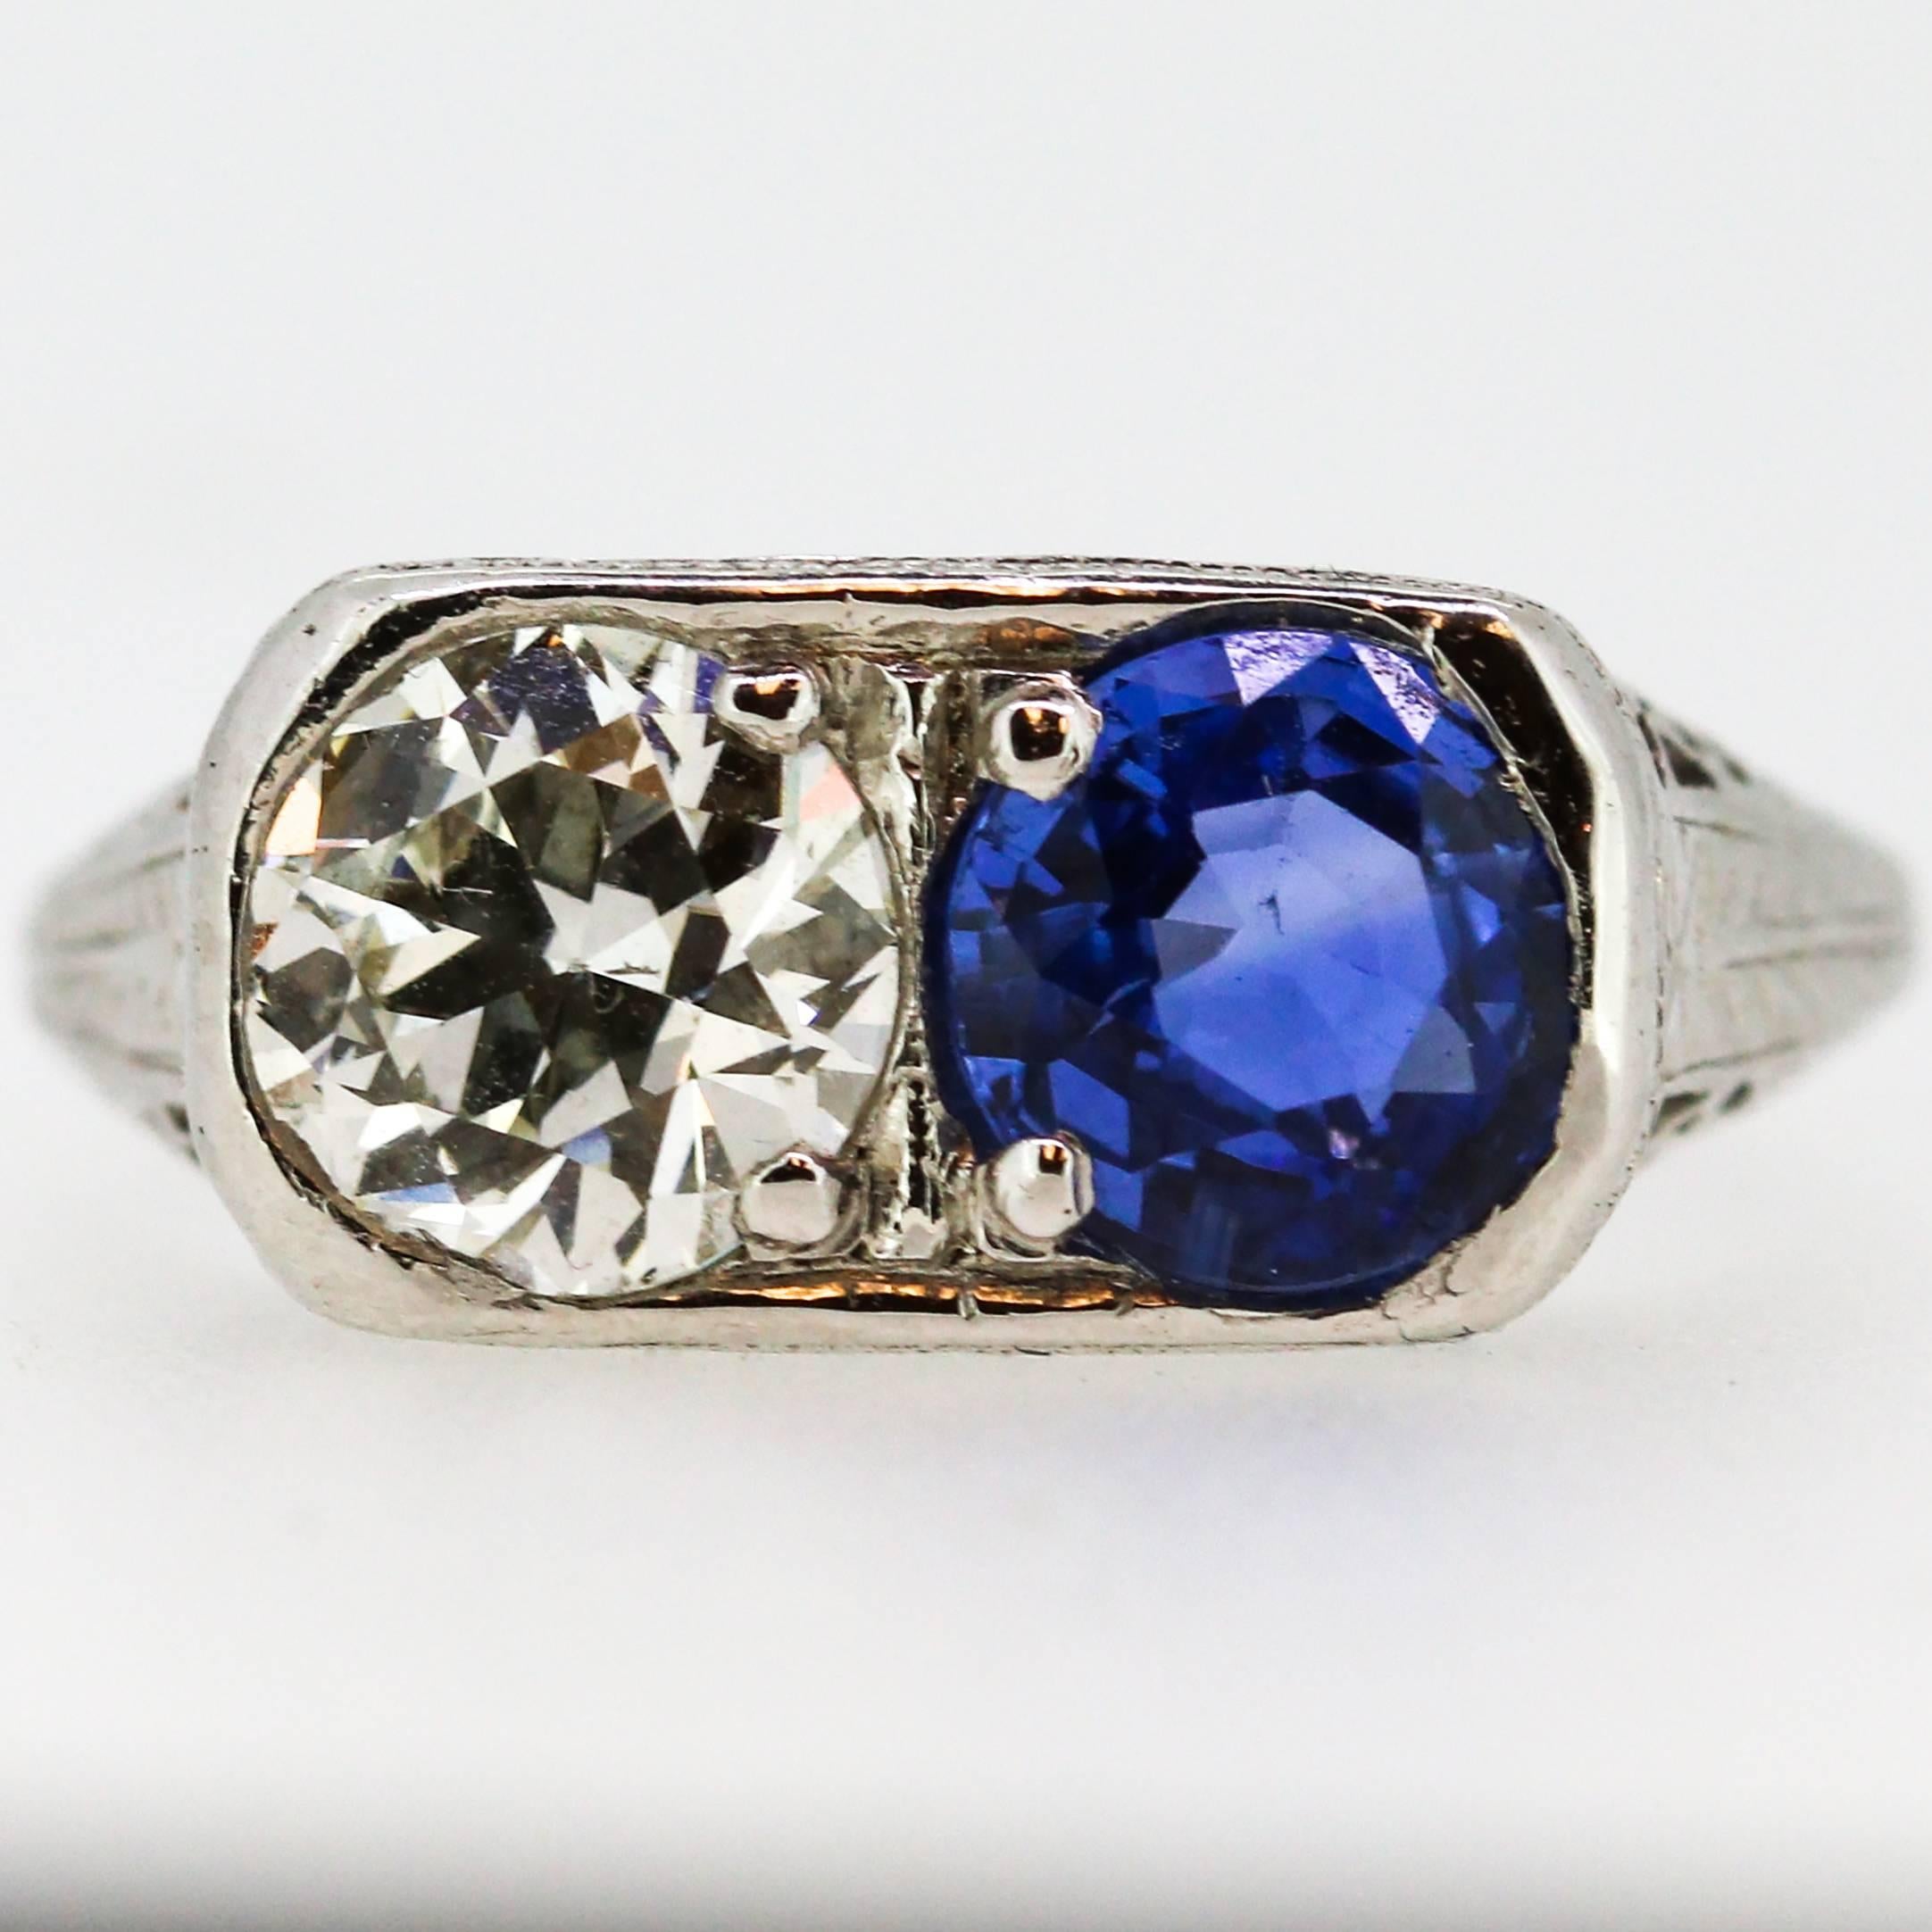 This gorgeous Art Deco ring focuses attention around 2 main center stones: a 1.43ct round blue sapphire and 1.15ct old European cut diamond which grades as 